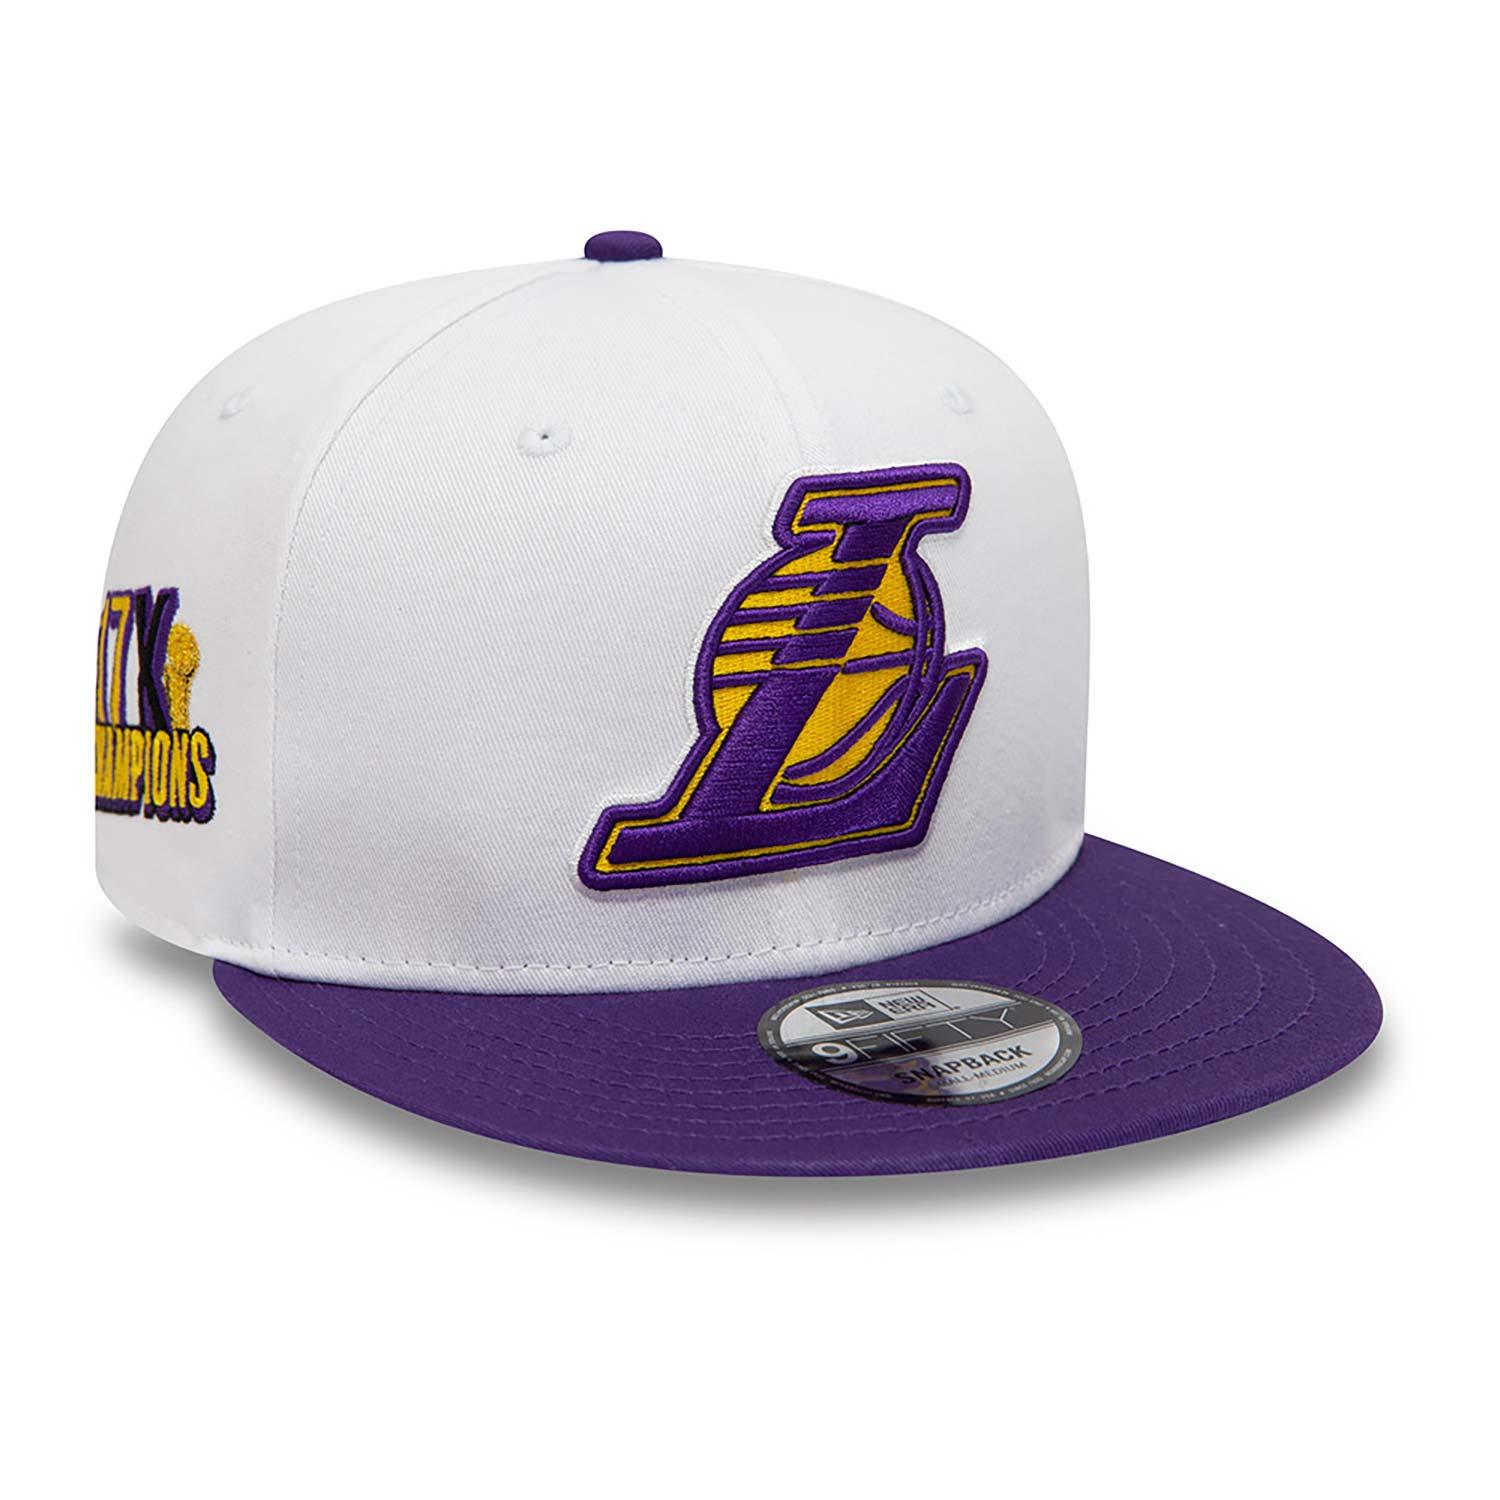 lakers hat white